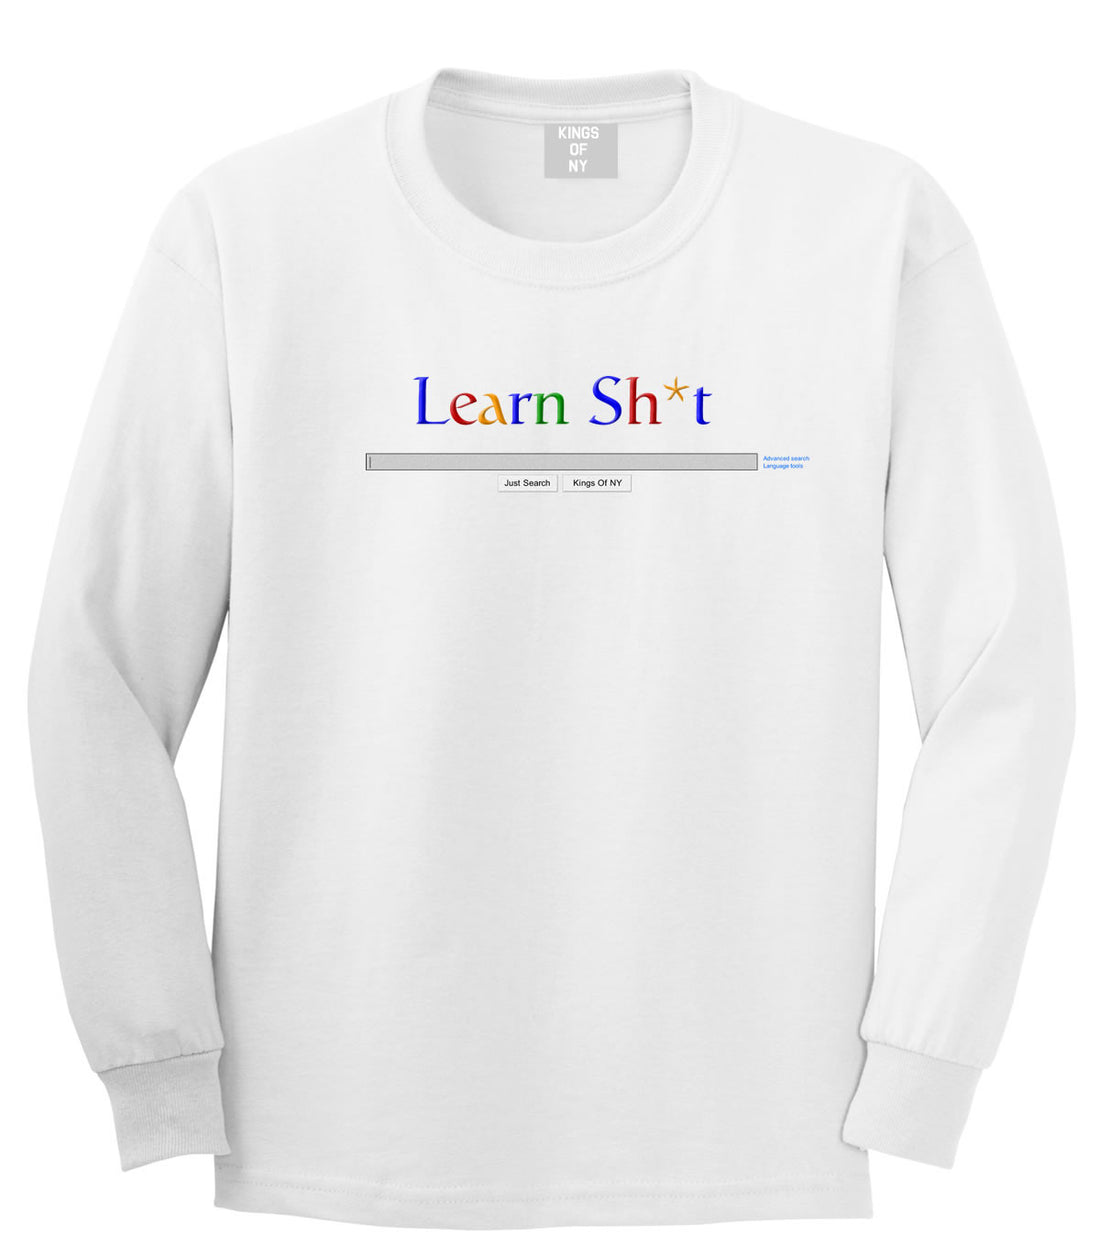 Learn Shit Search Long Sleeve T-Shirt in White By Kings Of NY